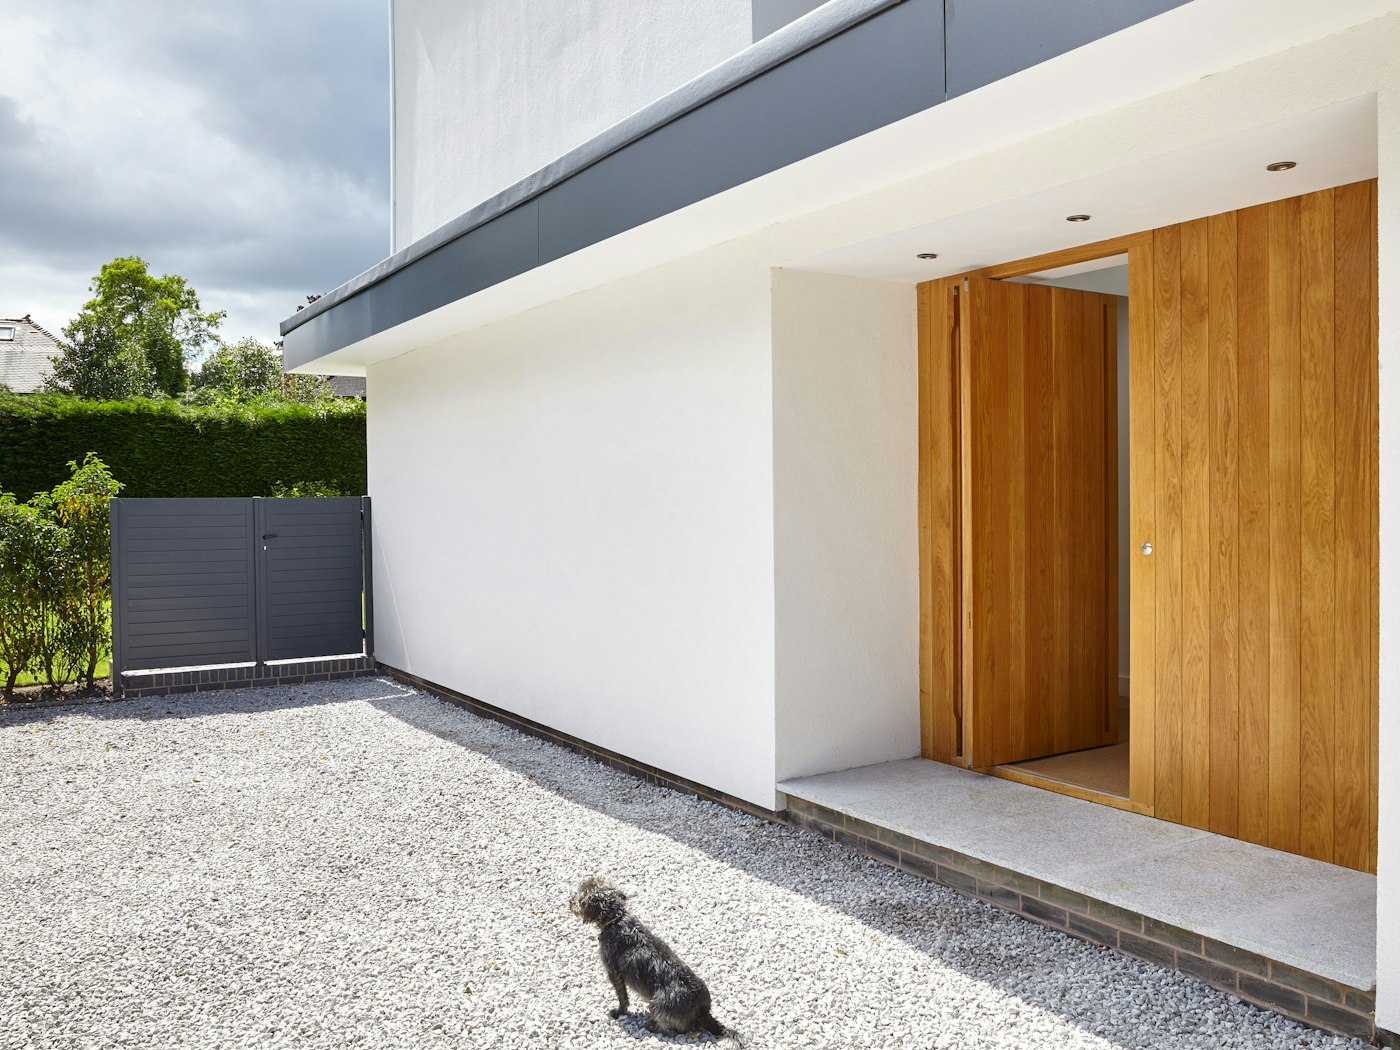 The additional wood side panel gives the impression of a larger entrance